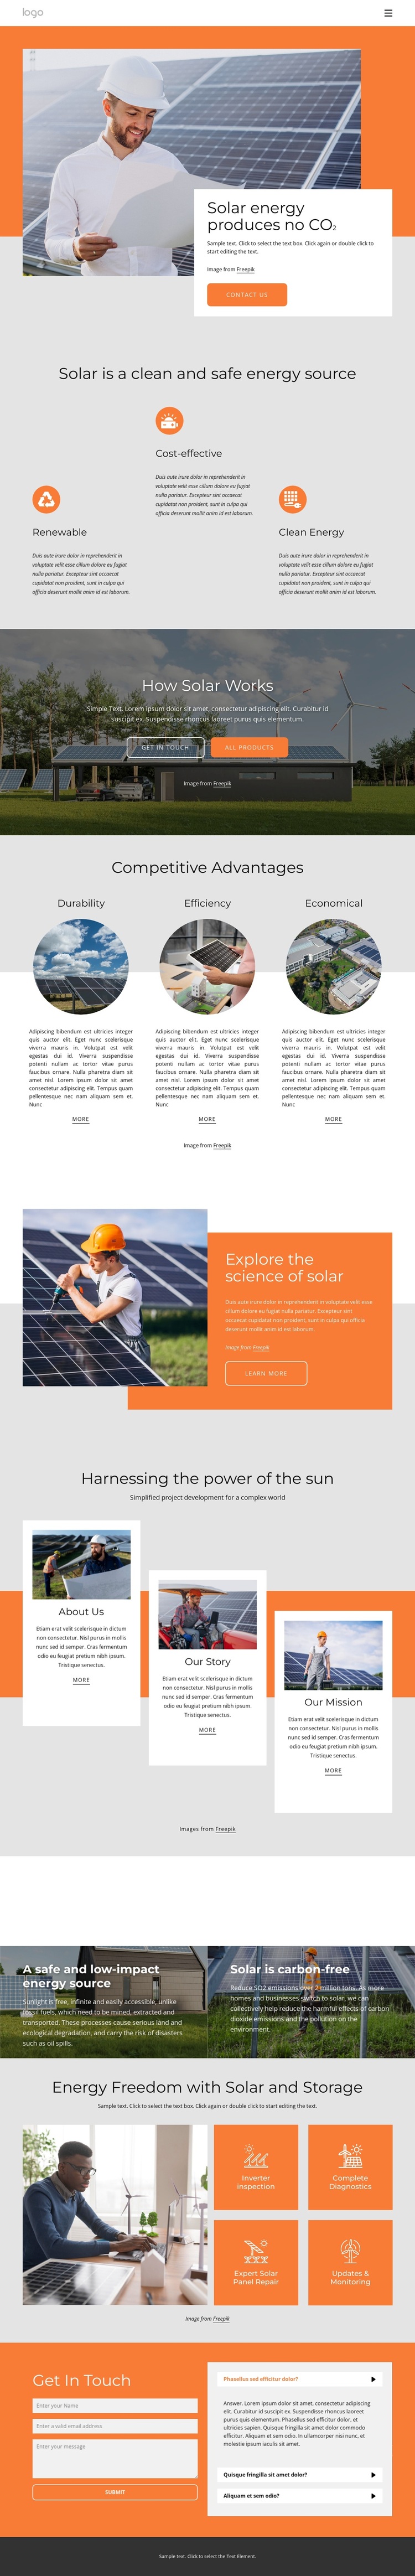 Power your home with clean solar energy Joomla Page Builder